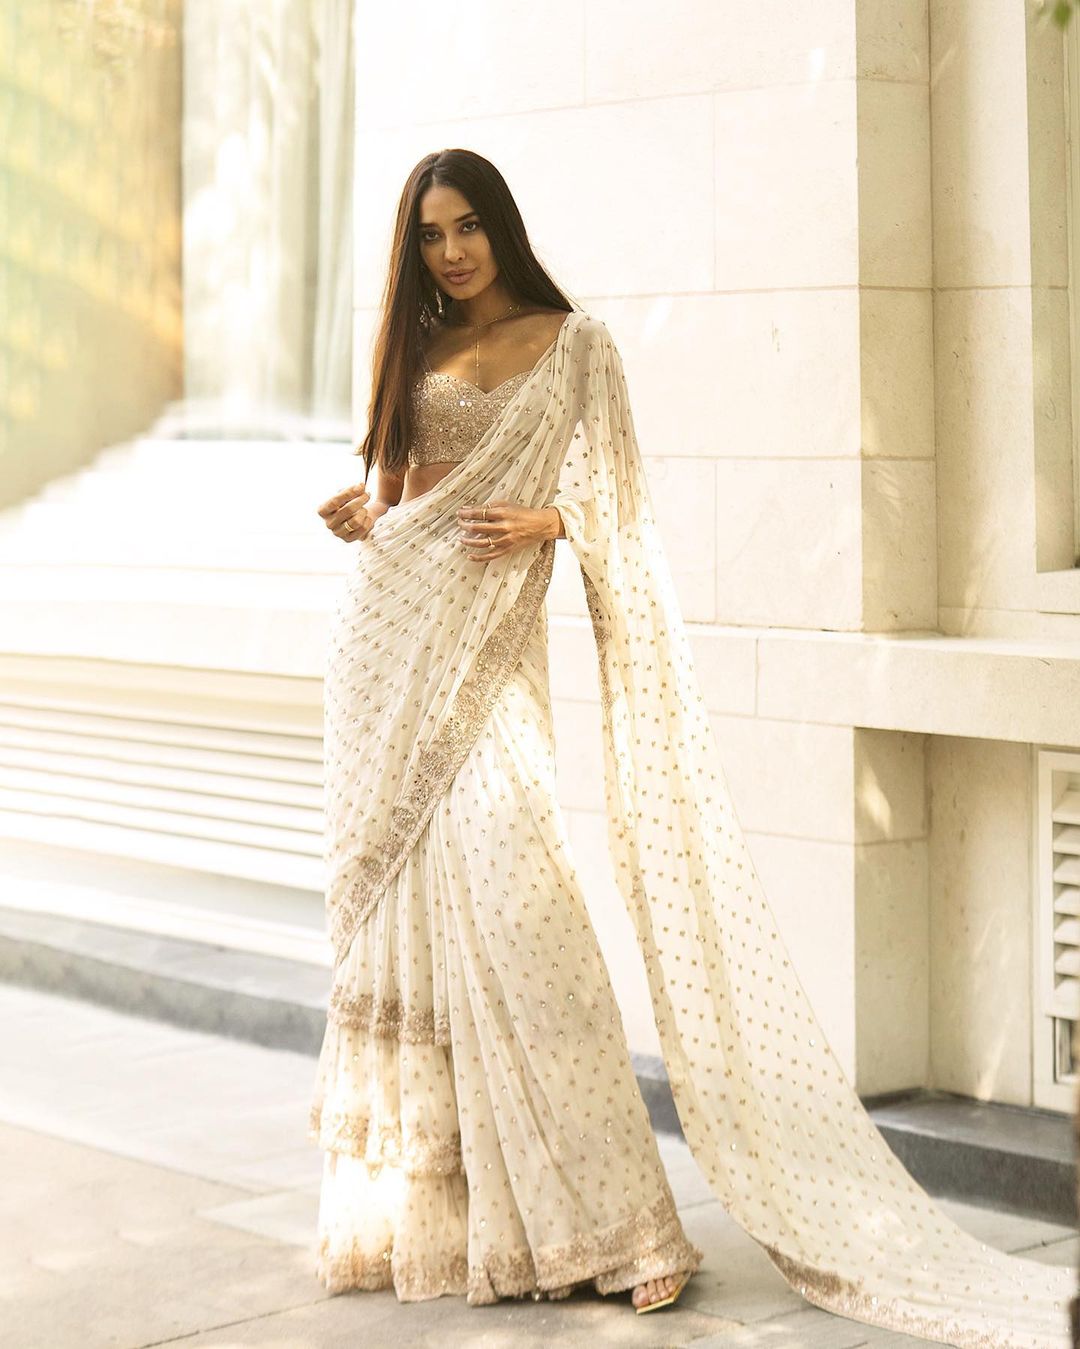 Mouni Roy Poses Gracefully In A Pastel Saree. Take A Look